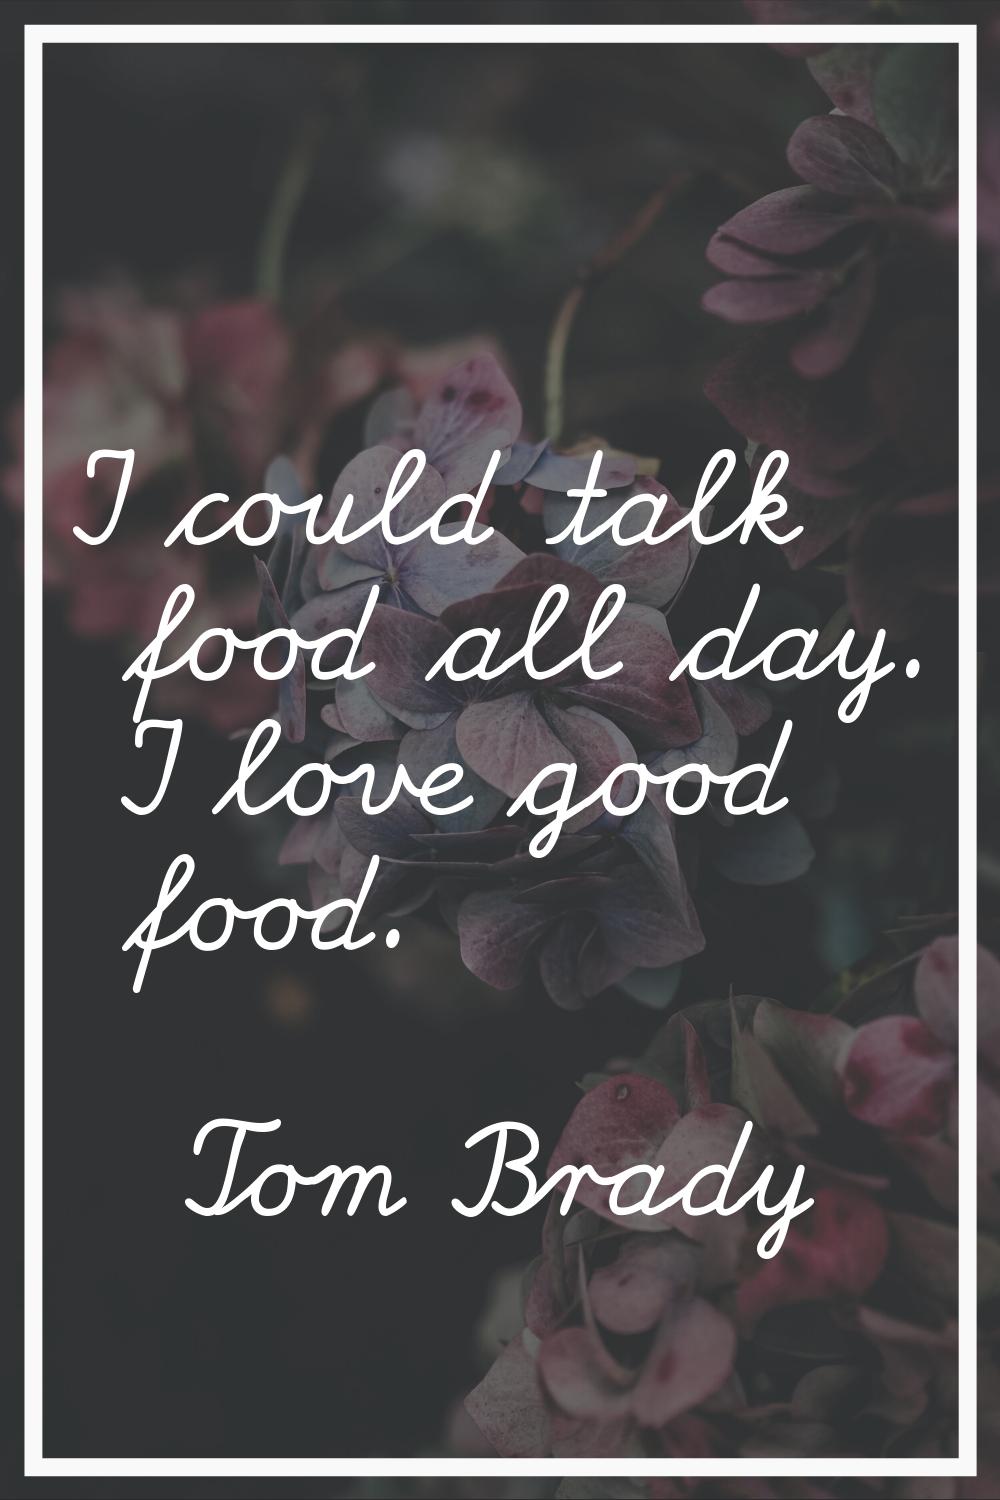 I could talk food all day. I love good food.